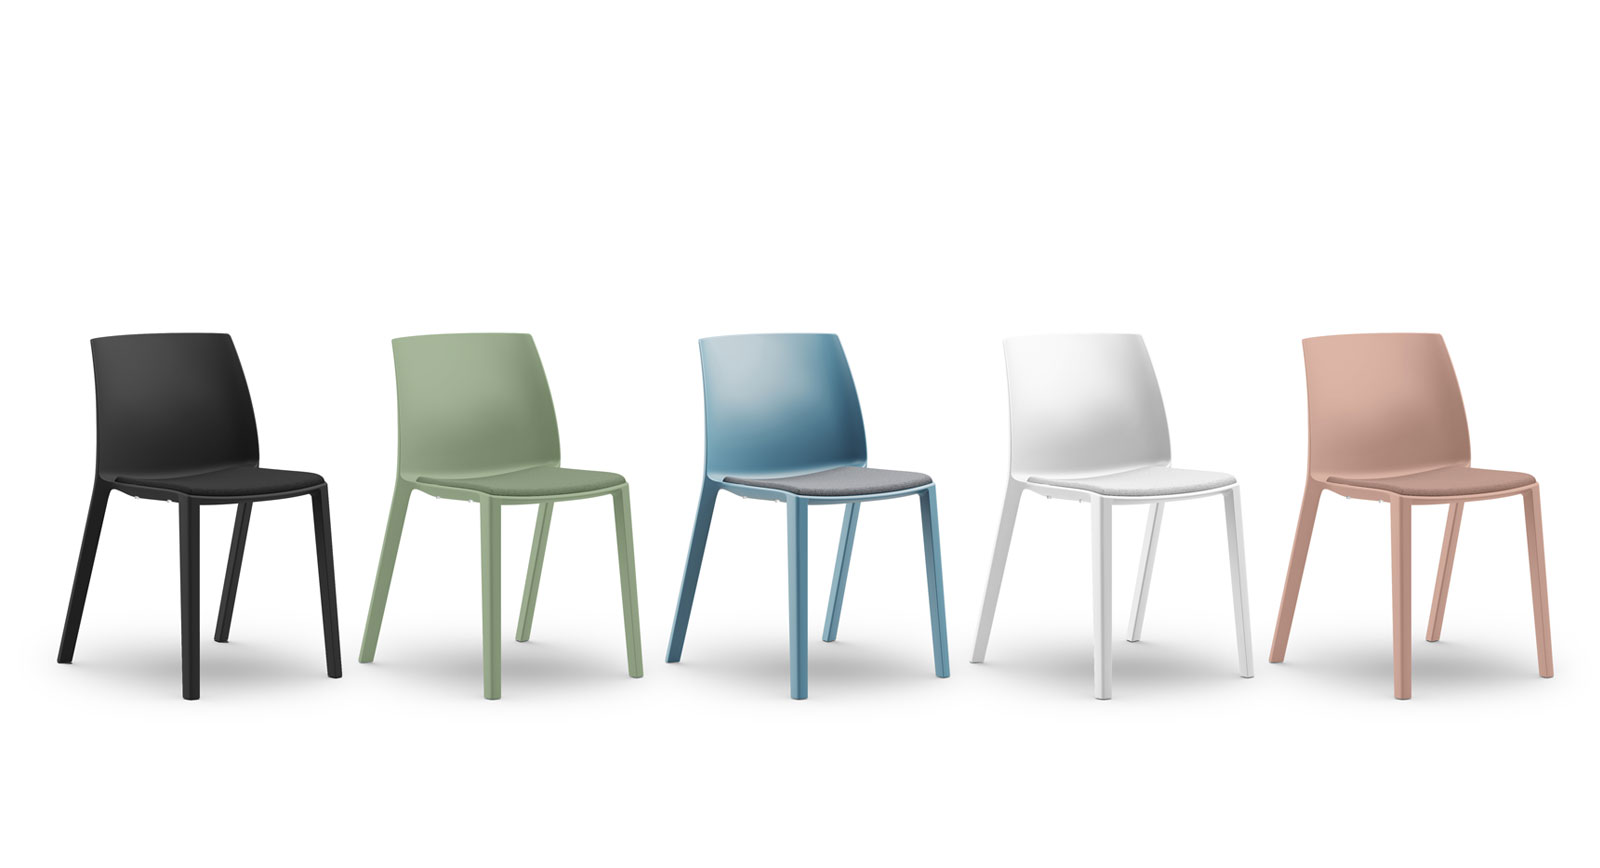 Palermo chairs are lightweight and adaptable